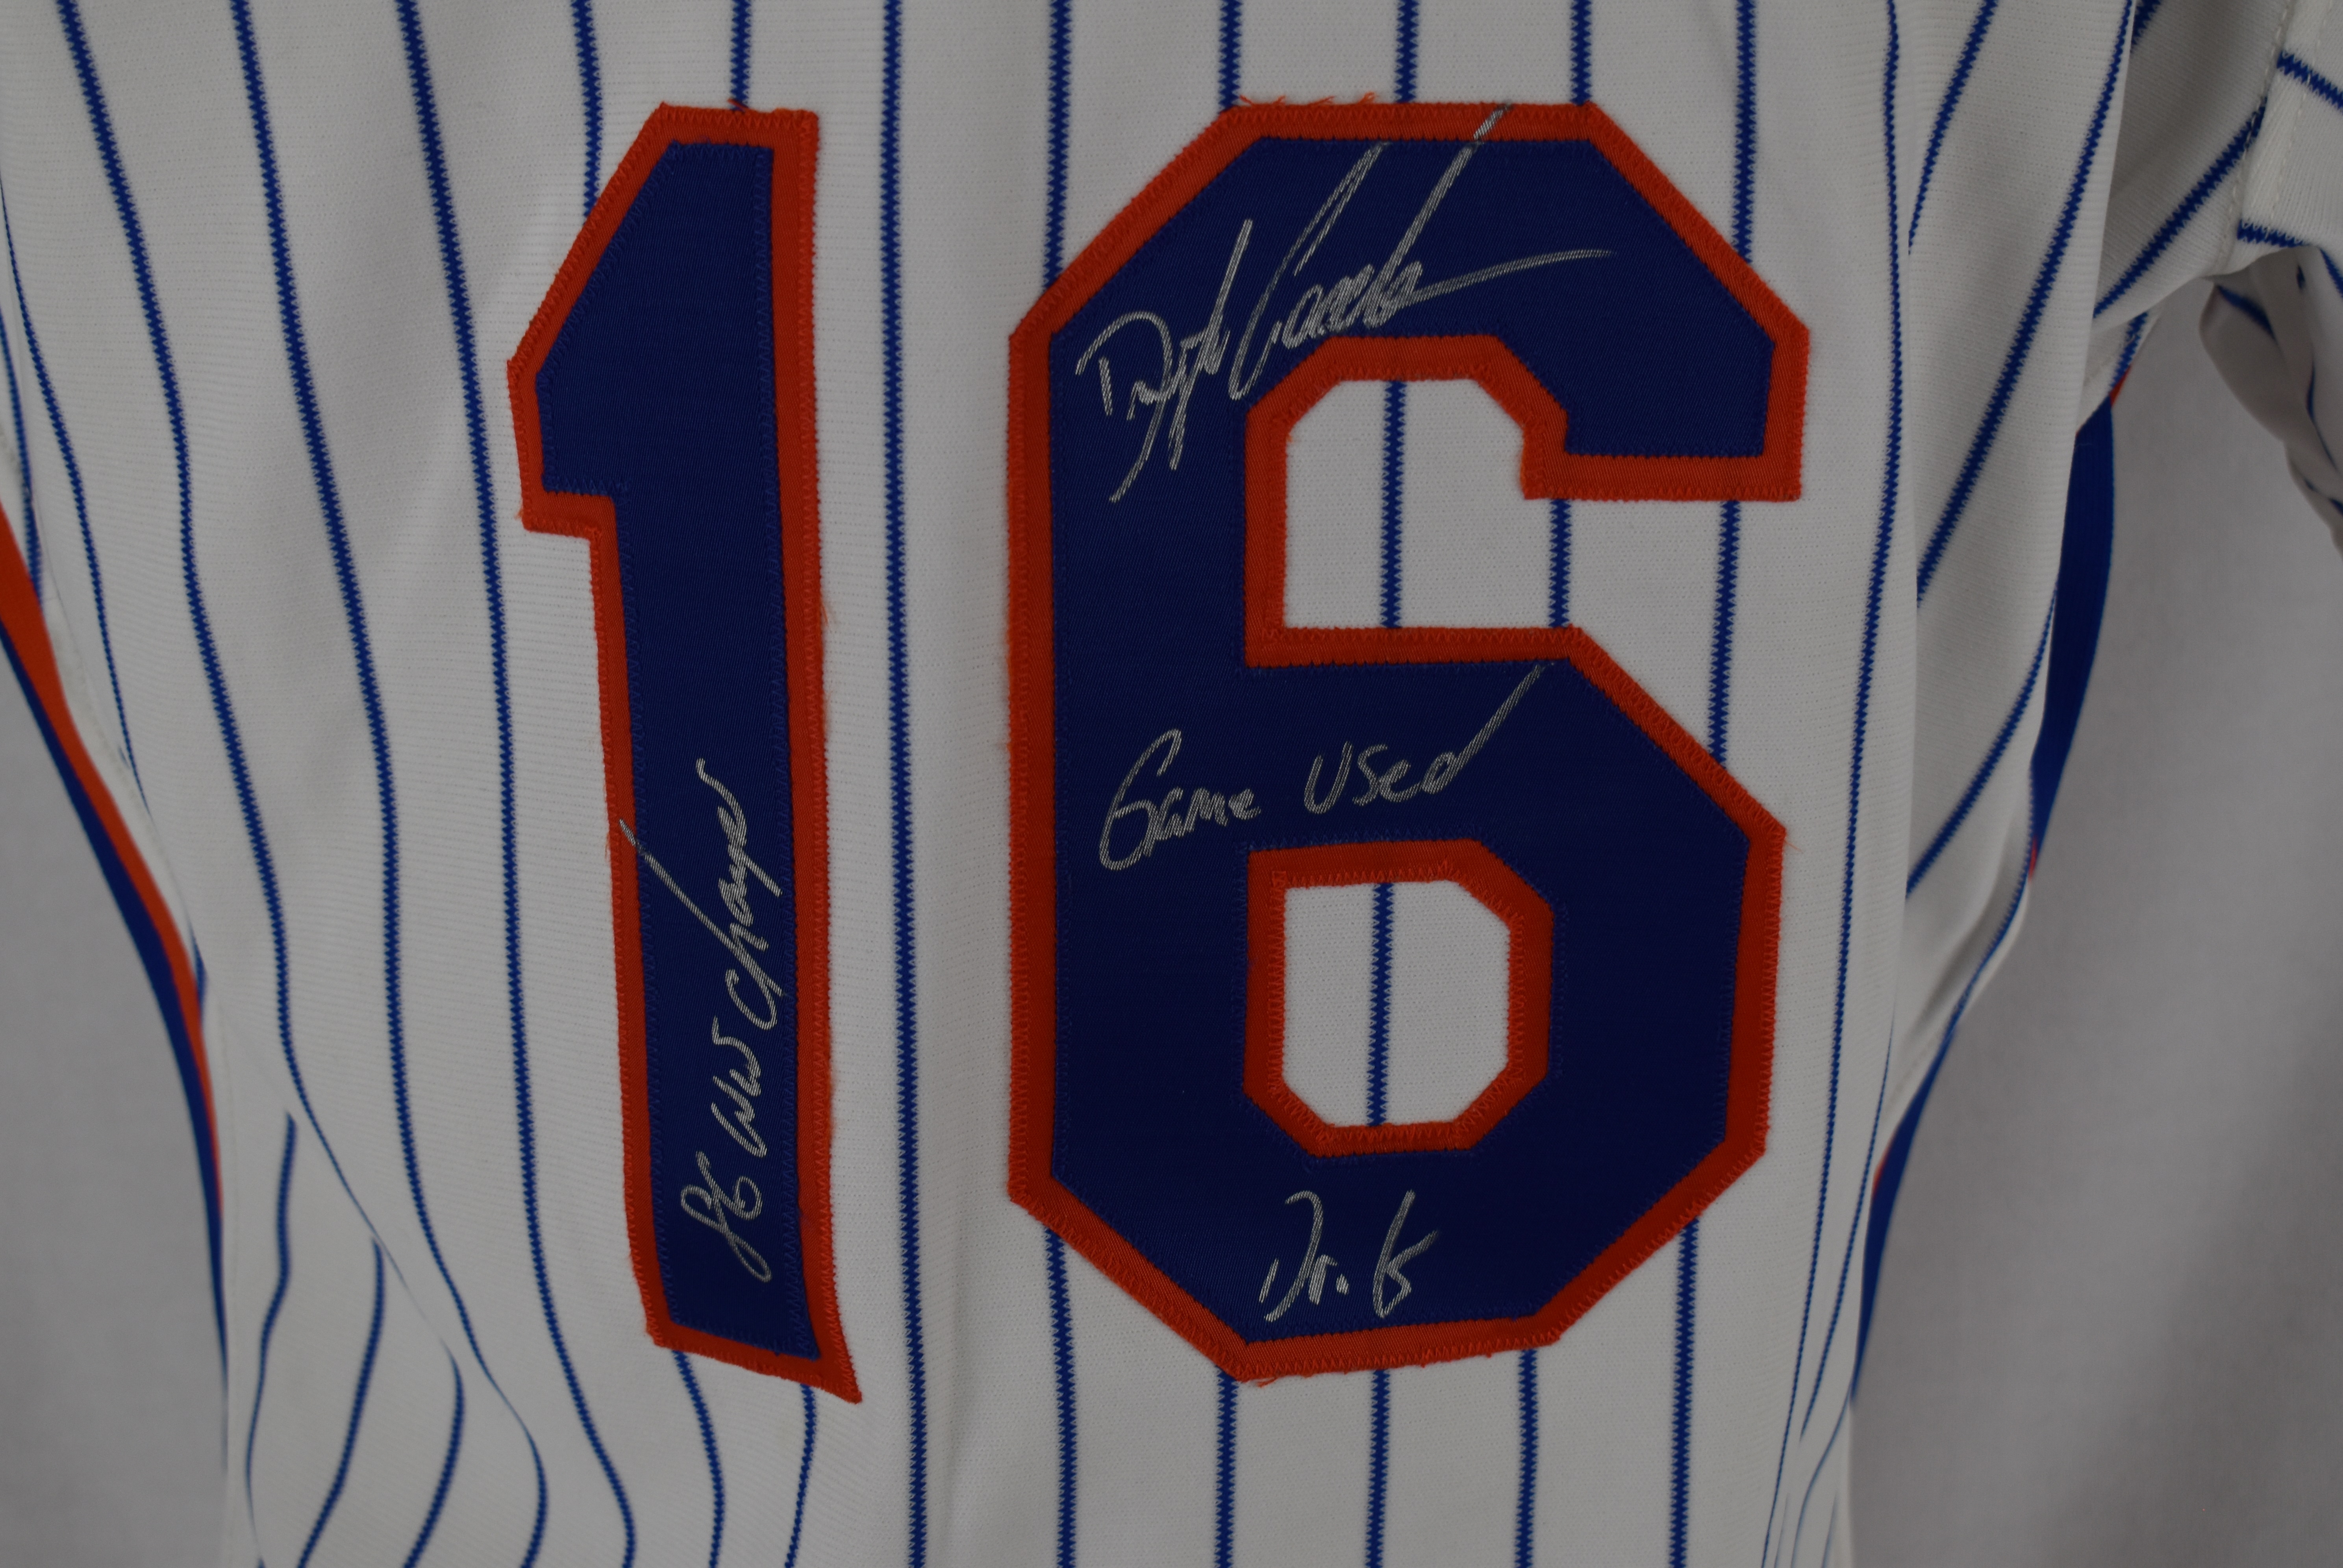 1986 Dwight Gooden Mets Game Used Road Jersey